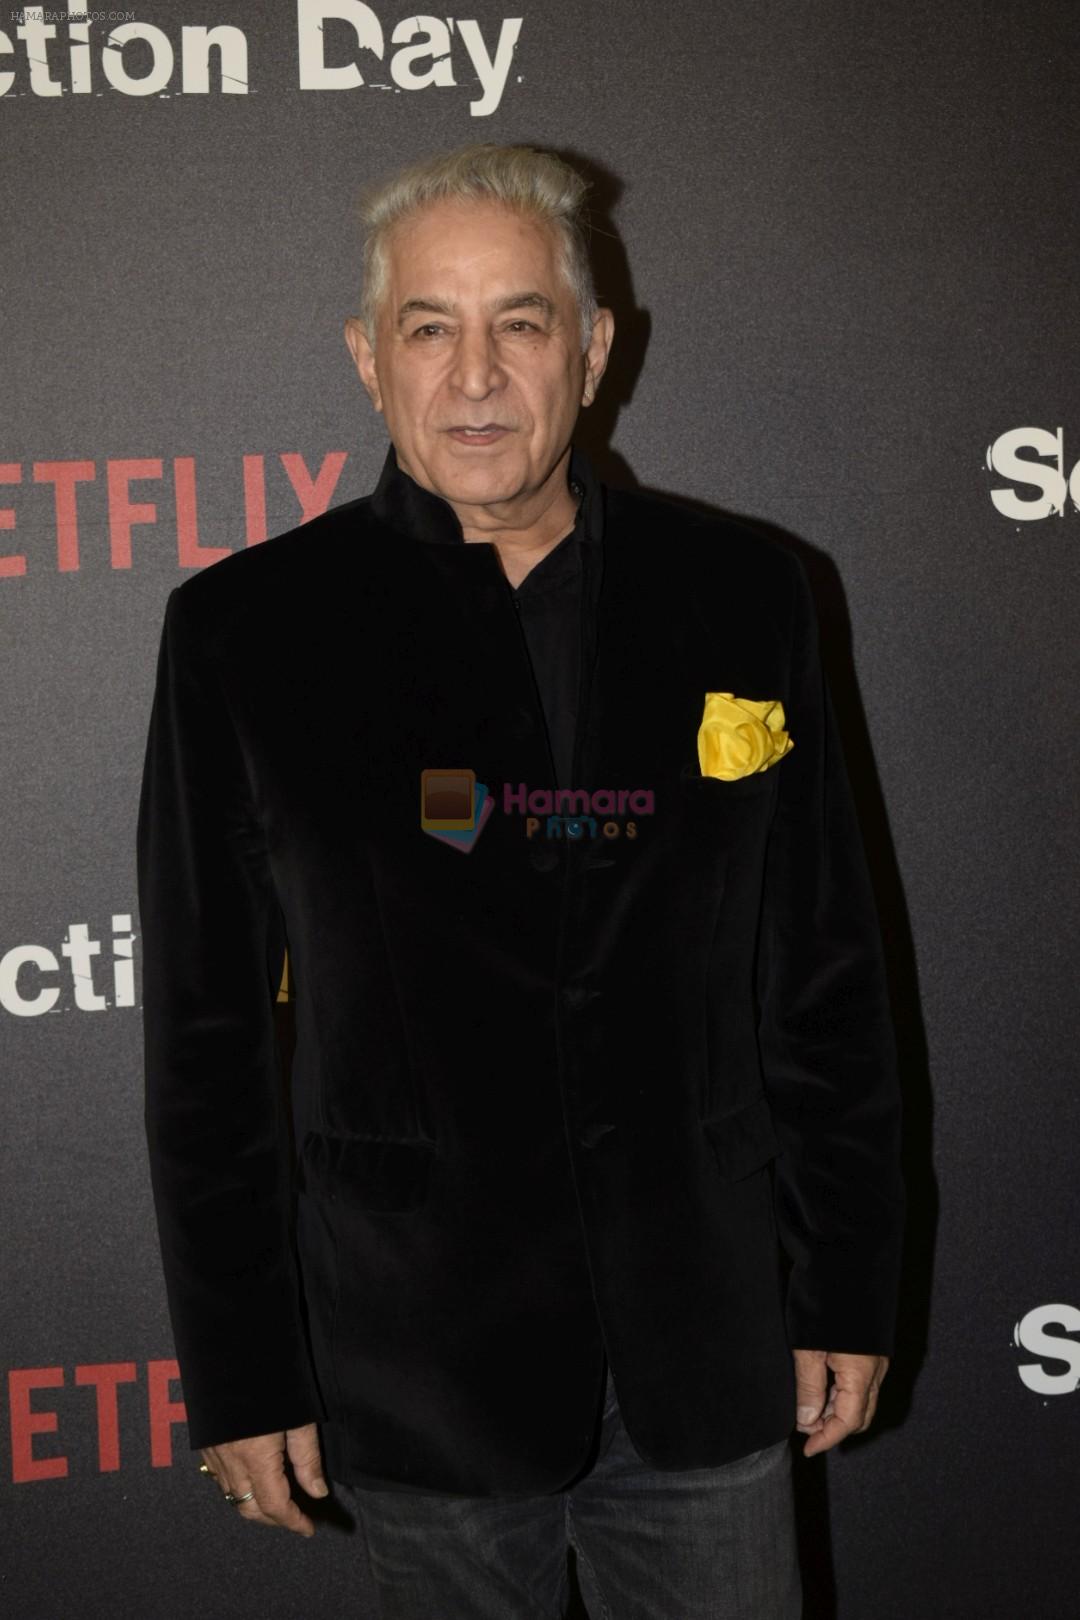 Dalip Tahil at the Red Carpet of Netfix Upcoming Series Selection Day on 18th Dec 2018